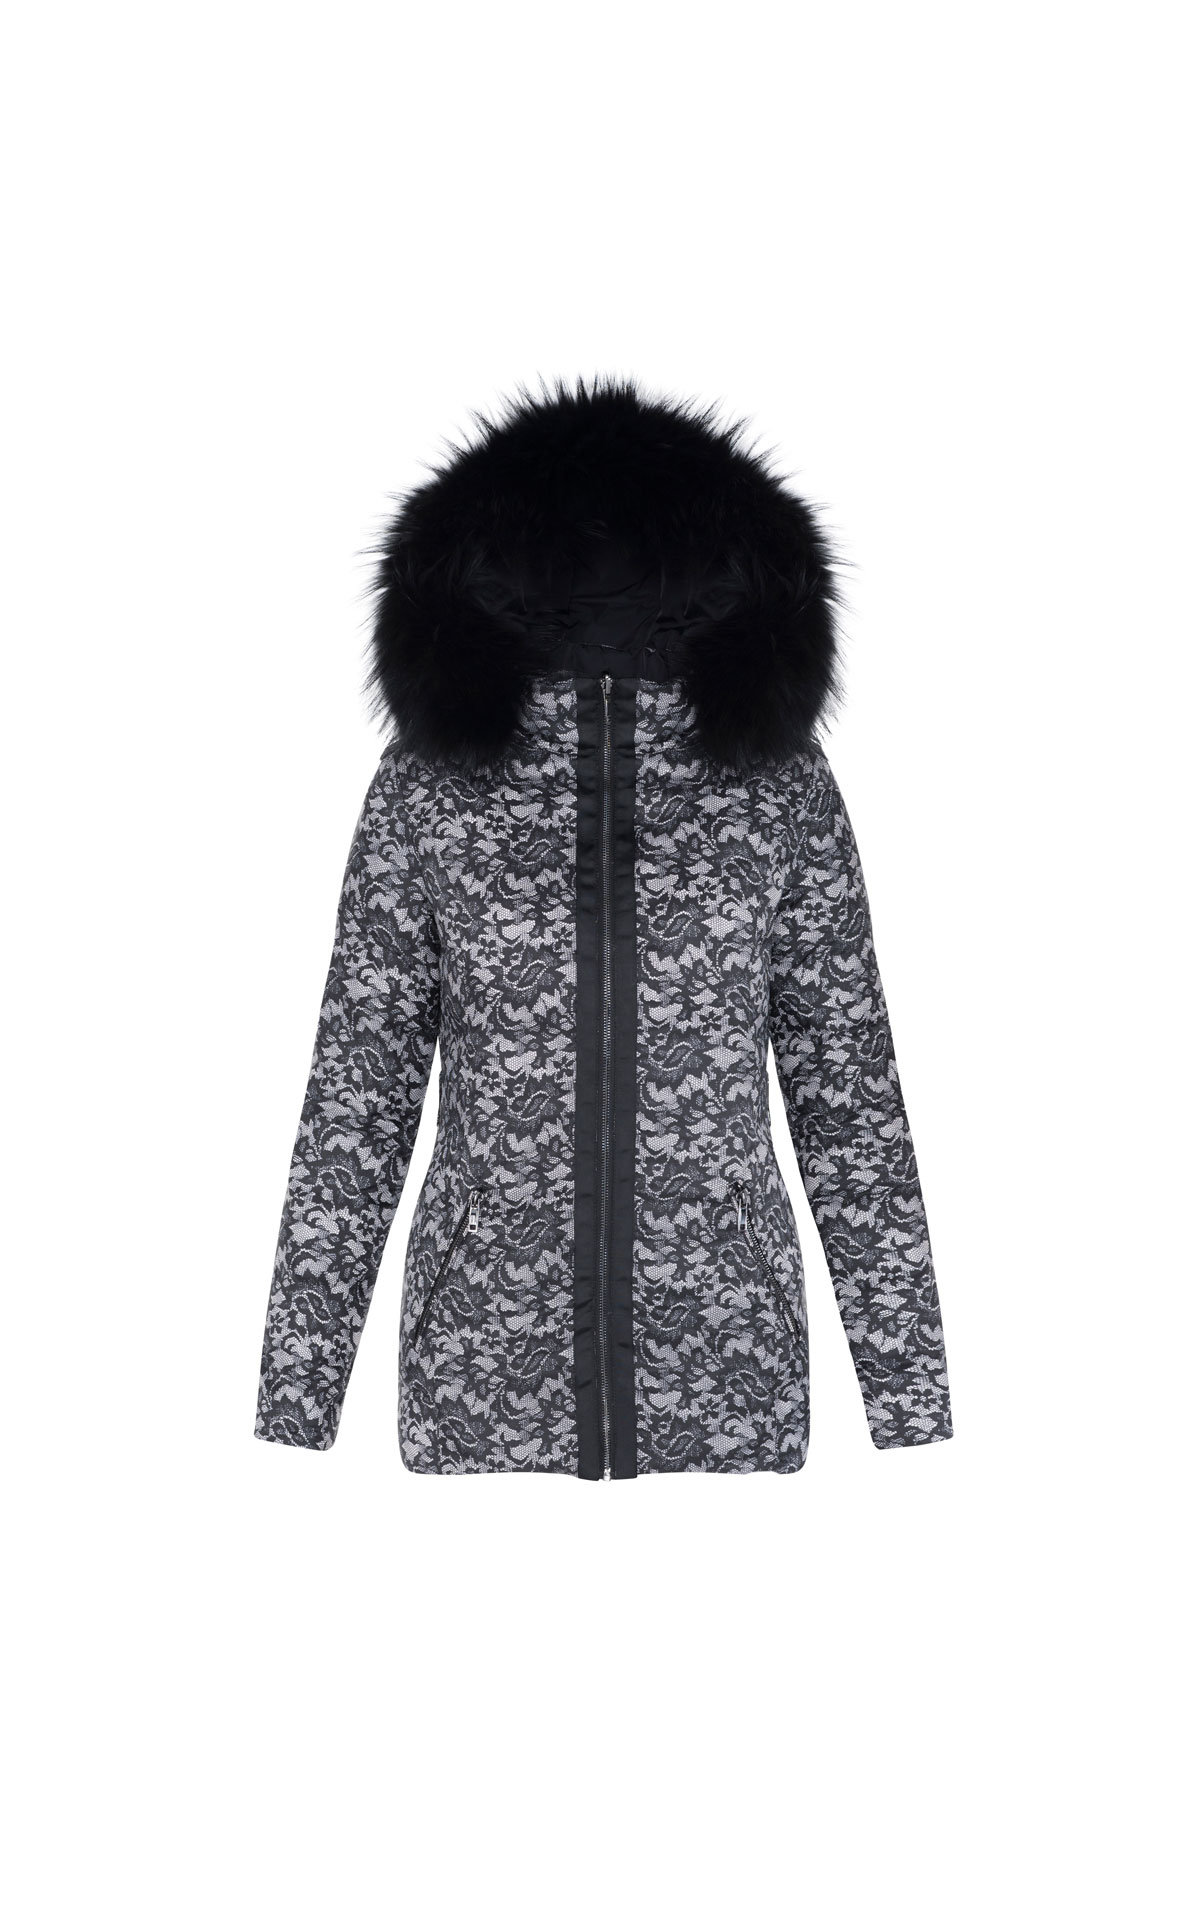 Anne Fontaine Sovannah coat from Bicester Village